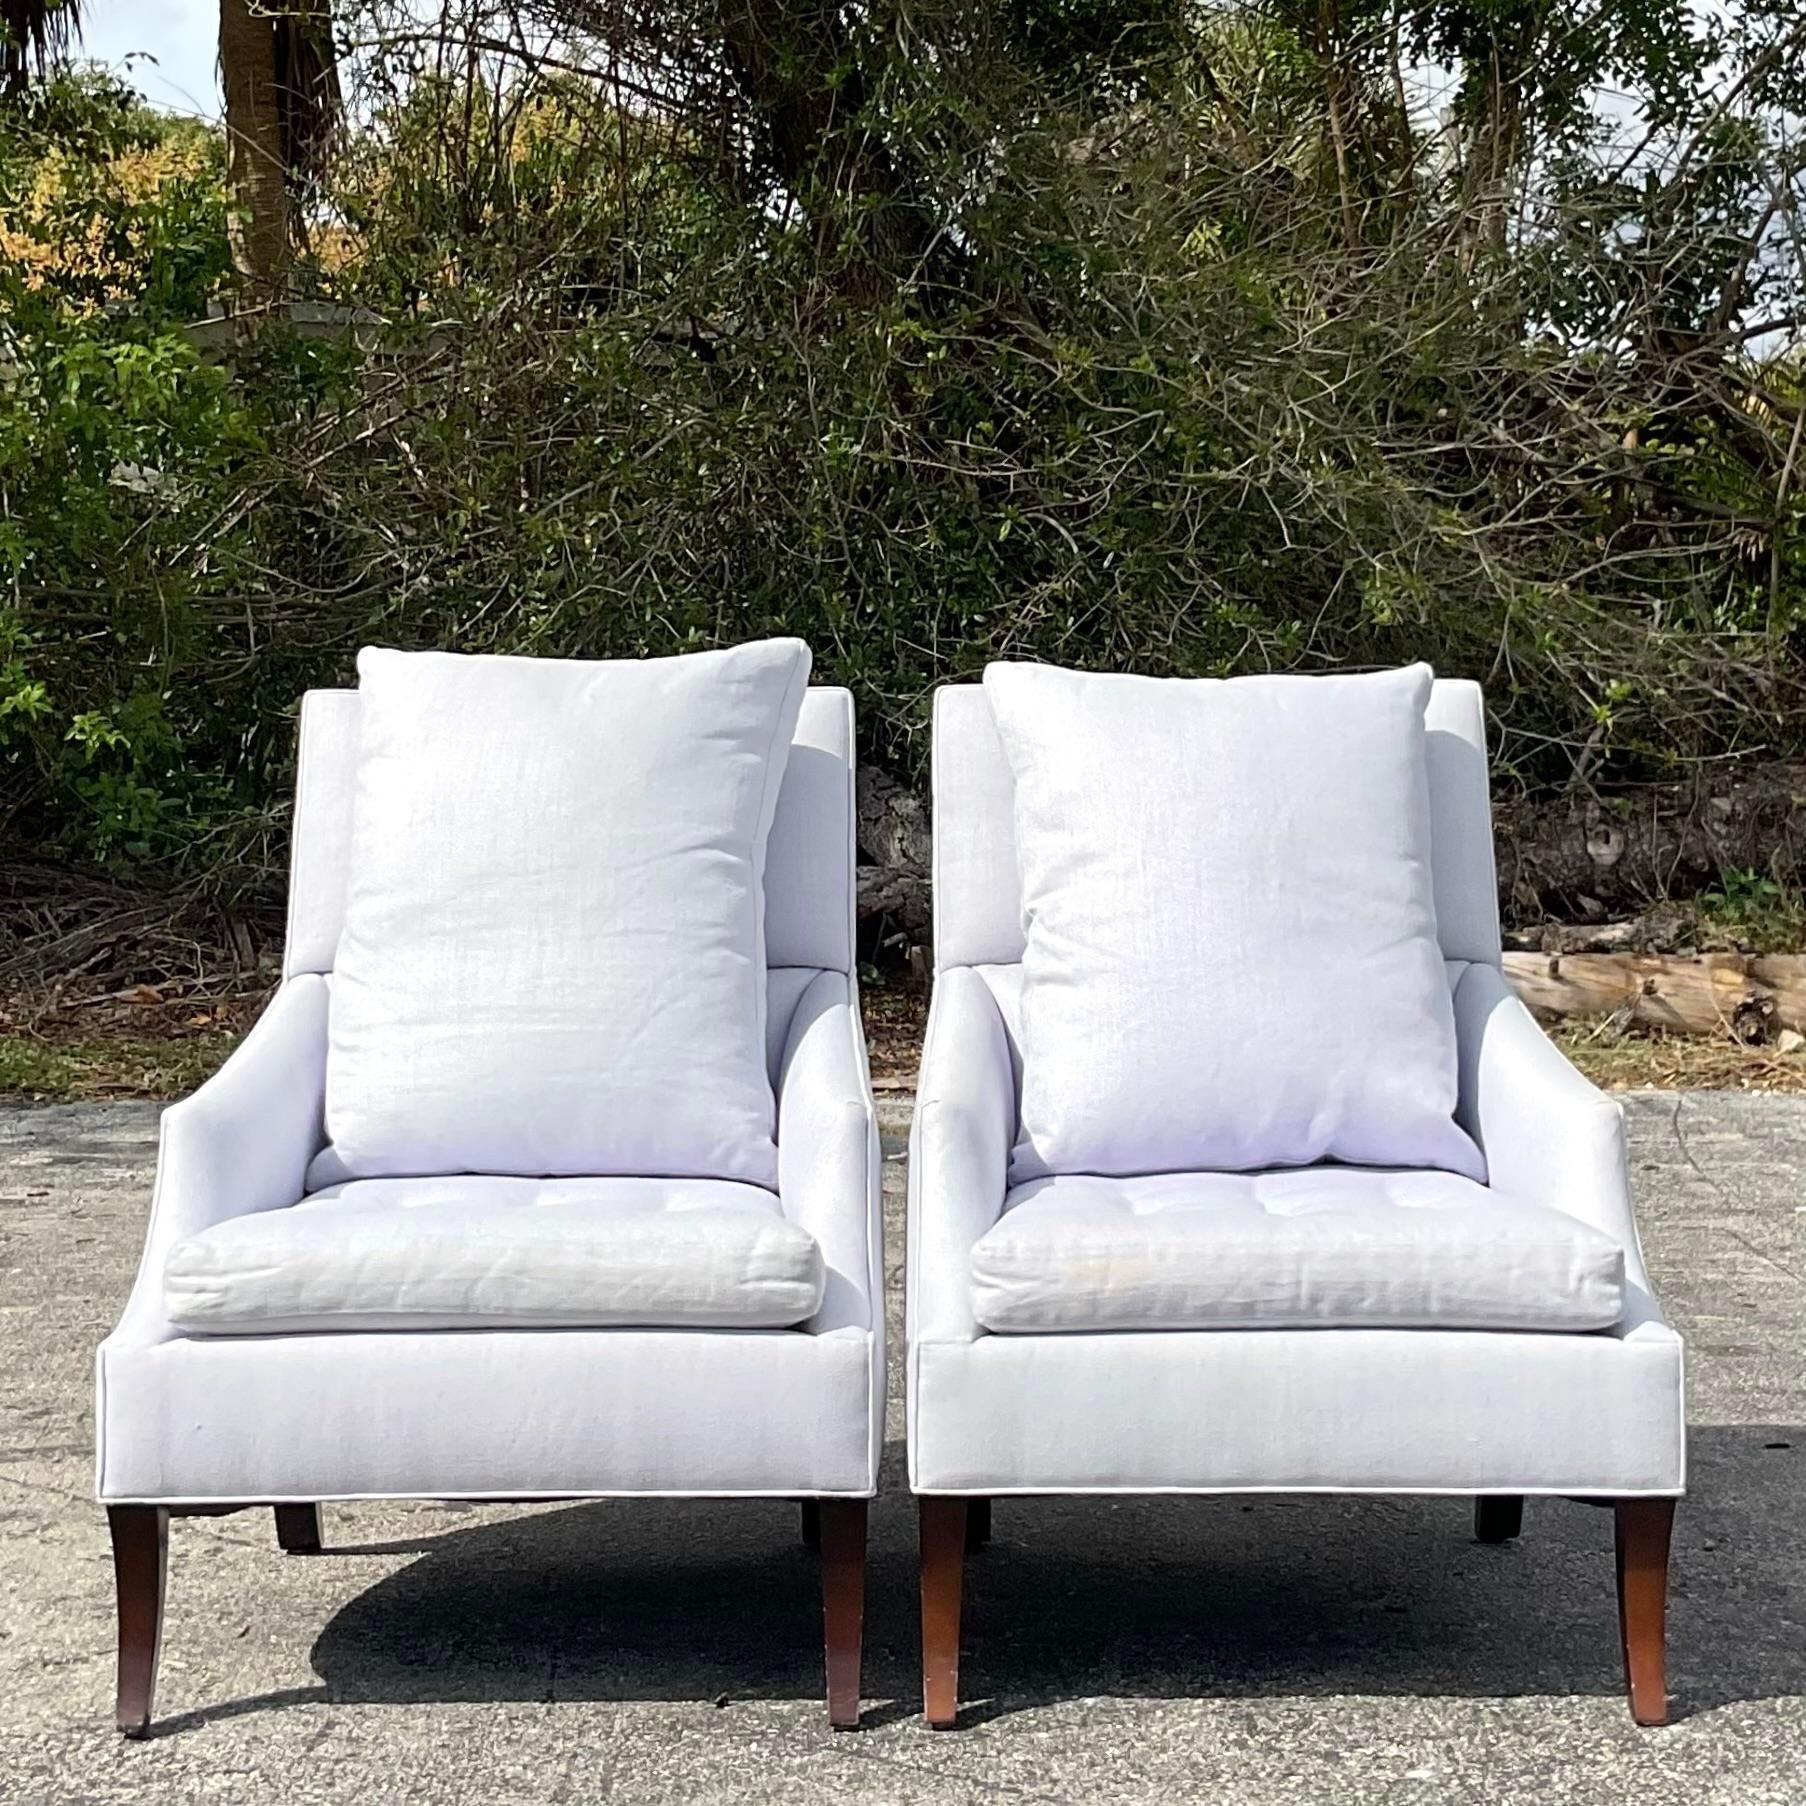 A fabulous pair of vintage Boho lounge chairs. Made by the iconic R. Jones group and tagged under the seat. Beautiful curved shape and high back. A chic loose cushion for extra comfort. Acquired from a Palm Beach estate